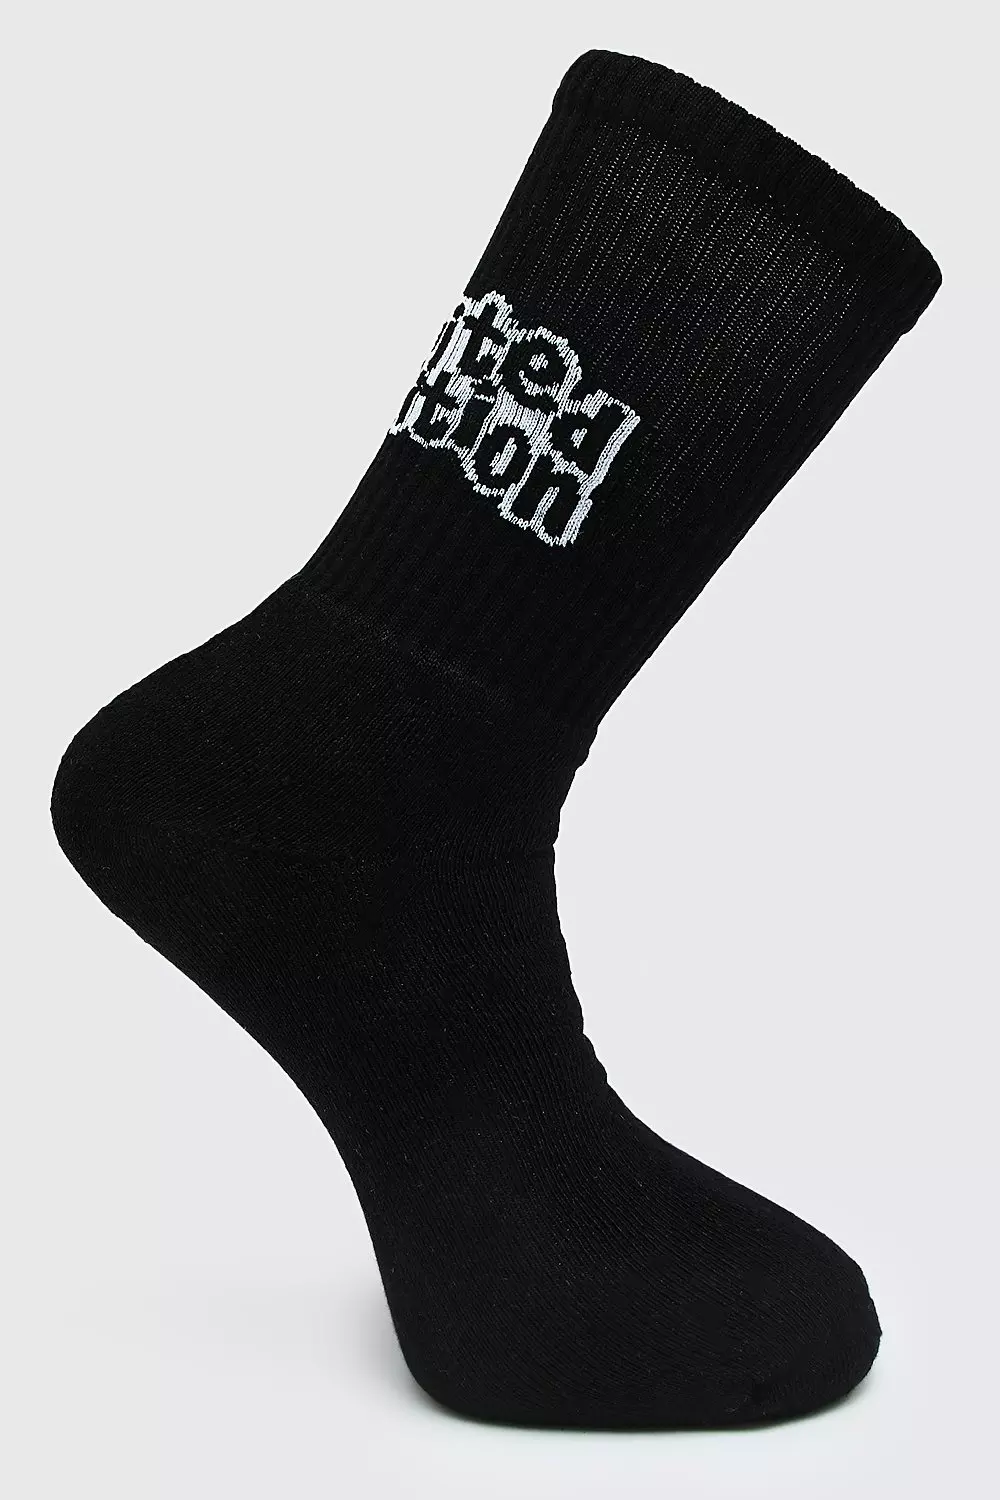 1 Pack Limited Edition Face Sock Black